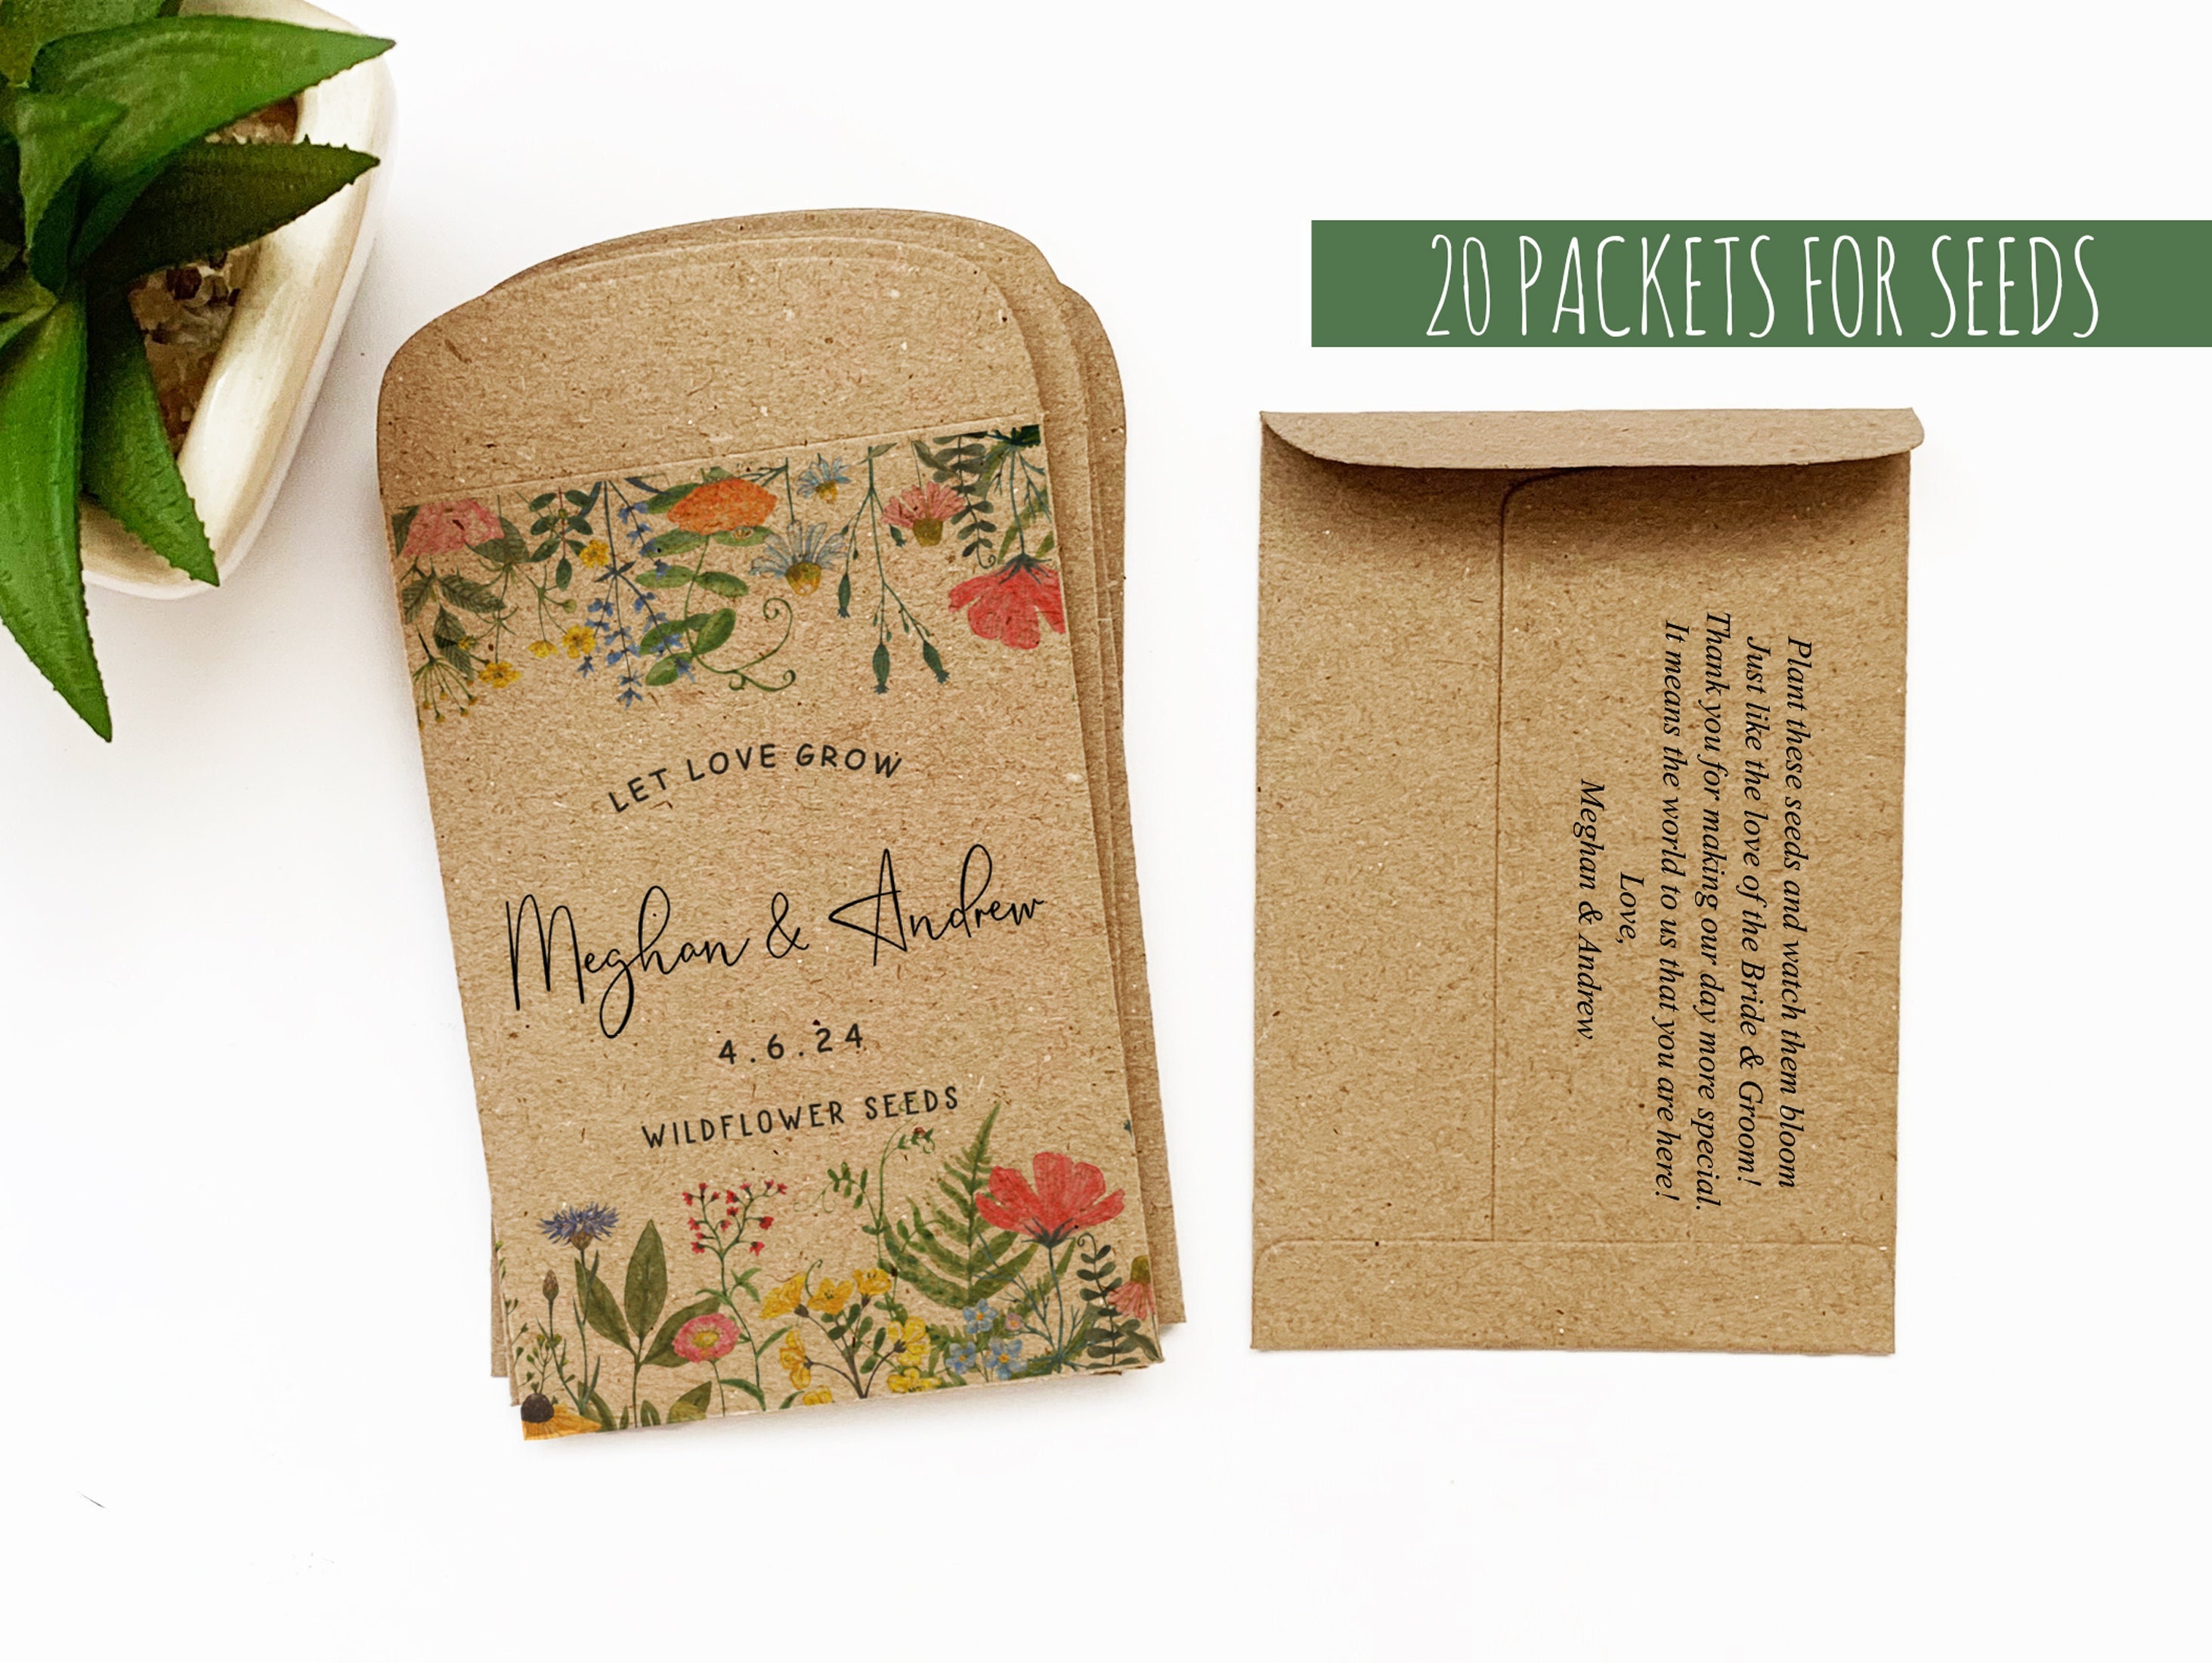 Wholesale flower seed packets For Many Packaging Needs 